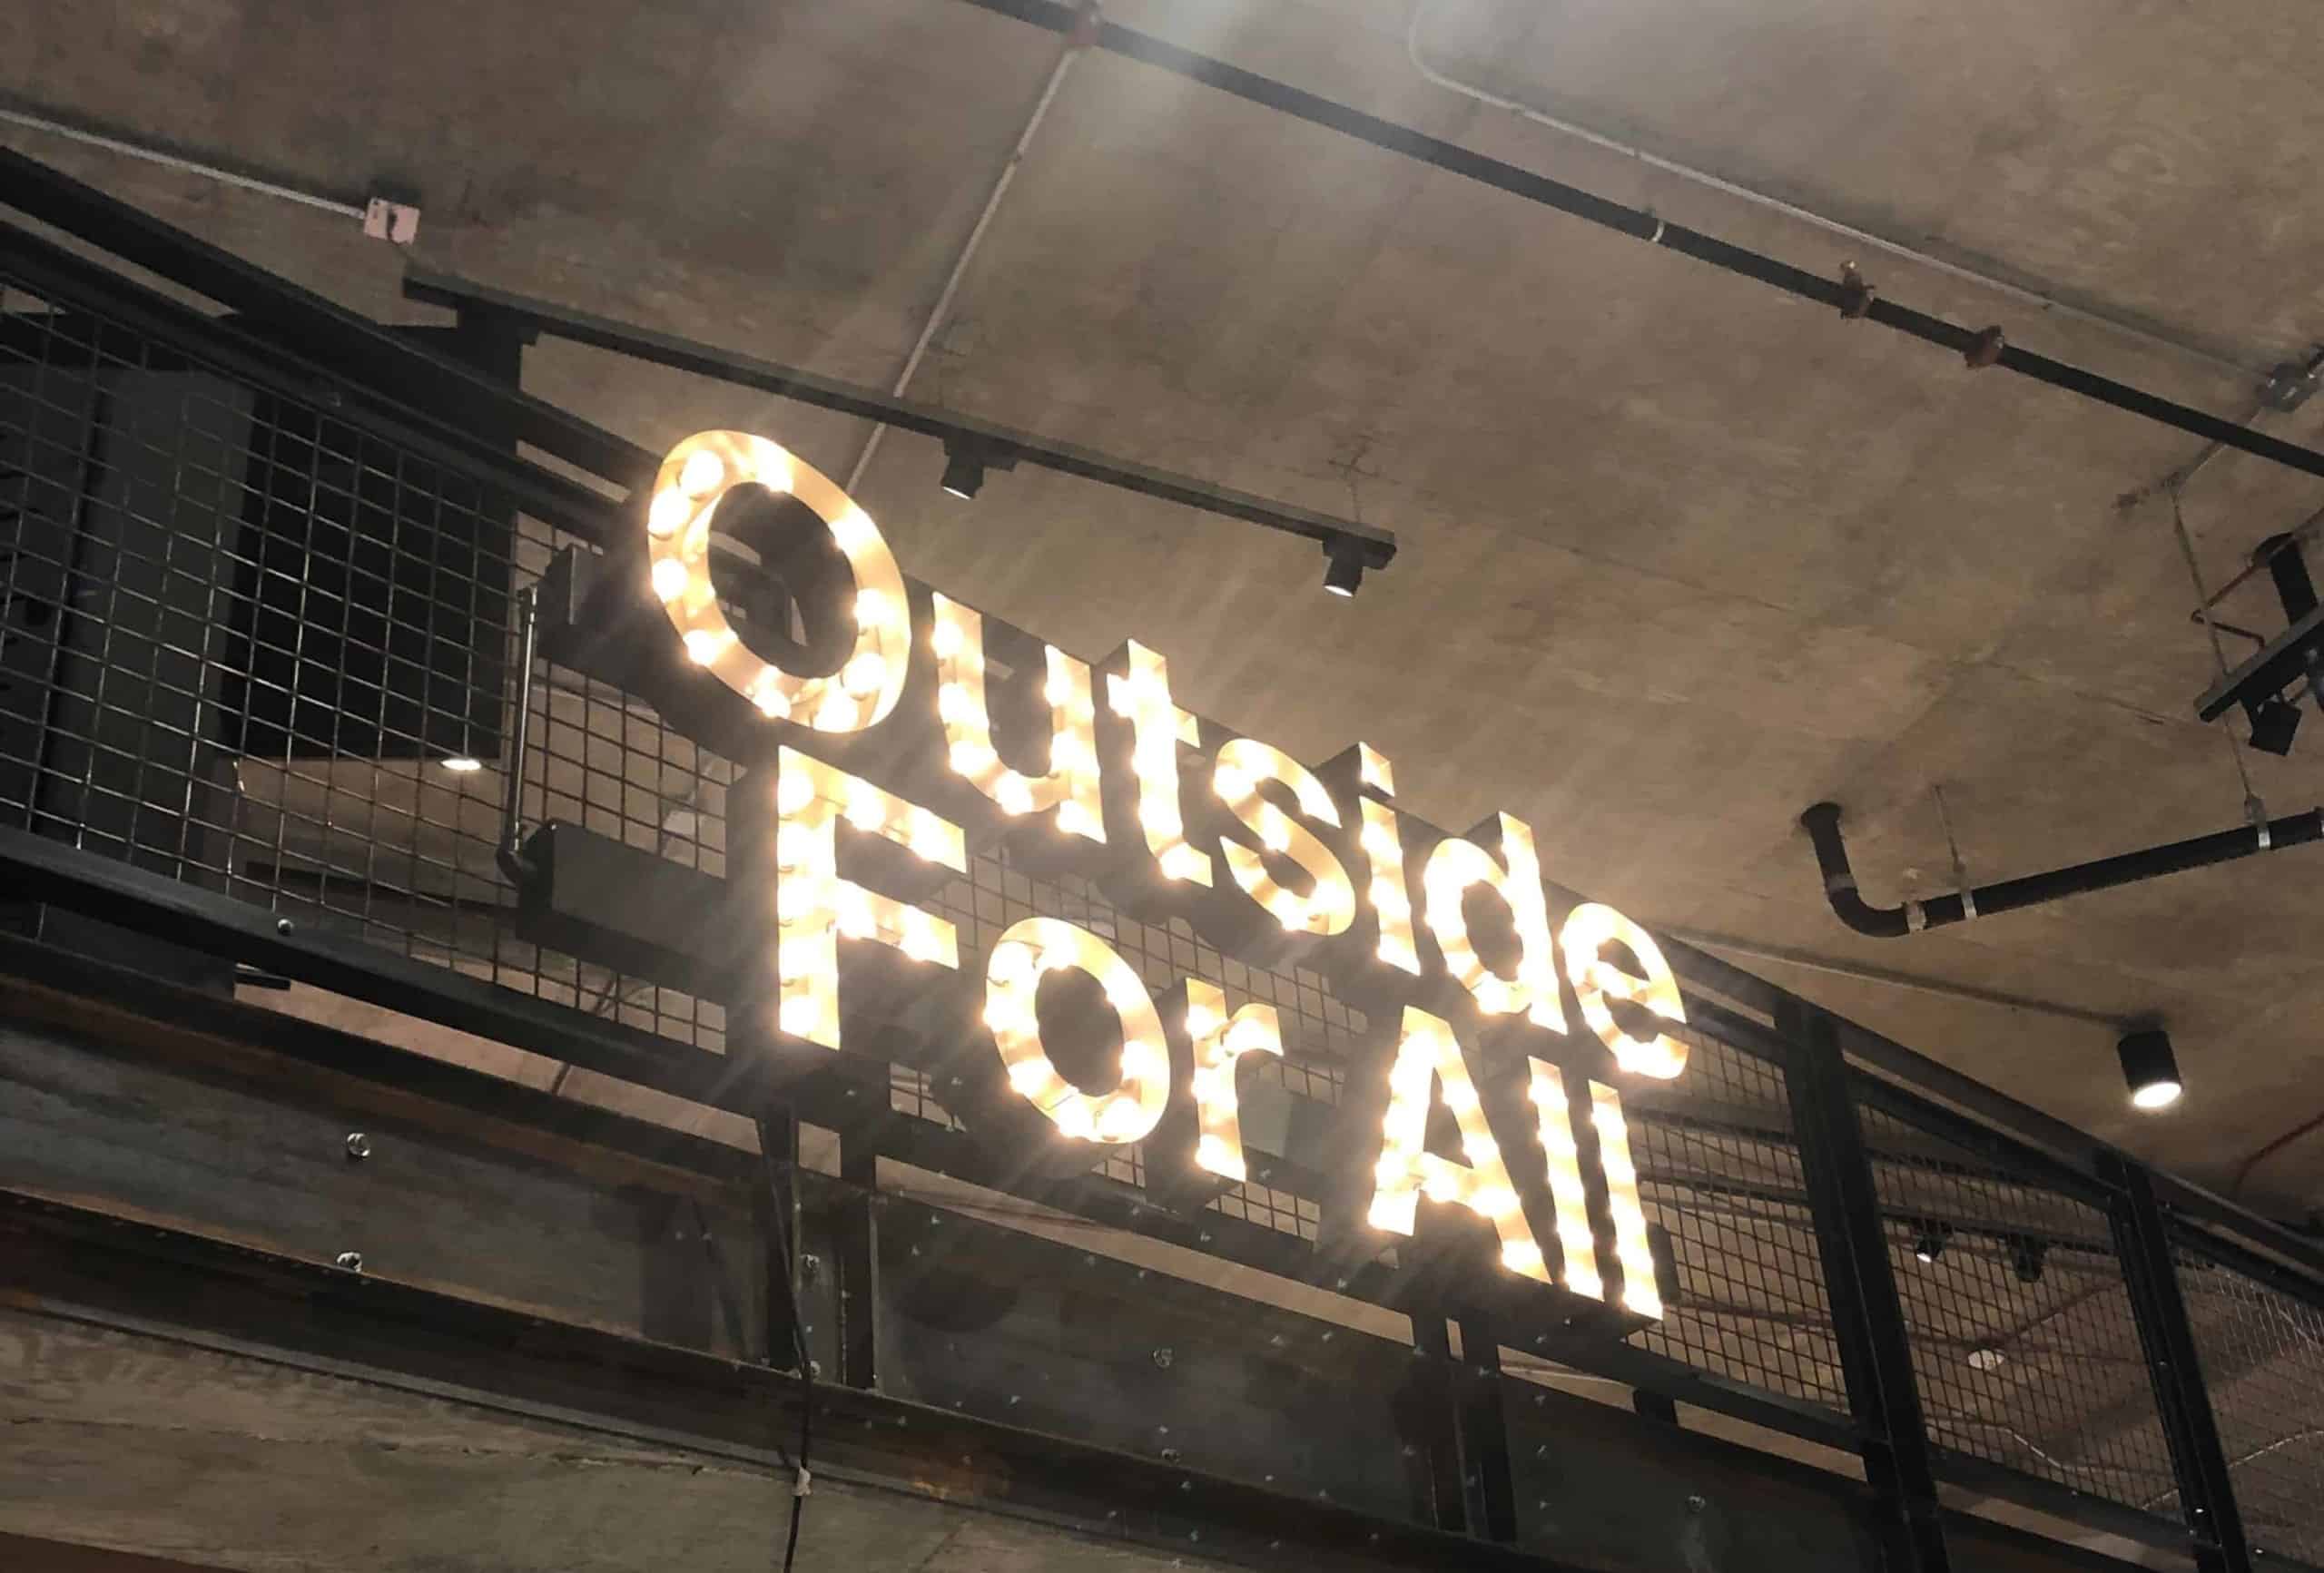 Outdoors for All